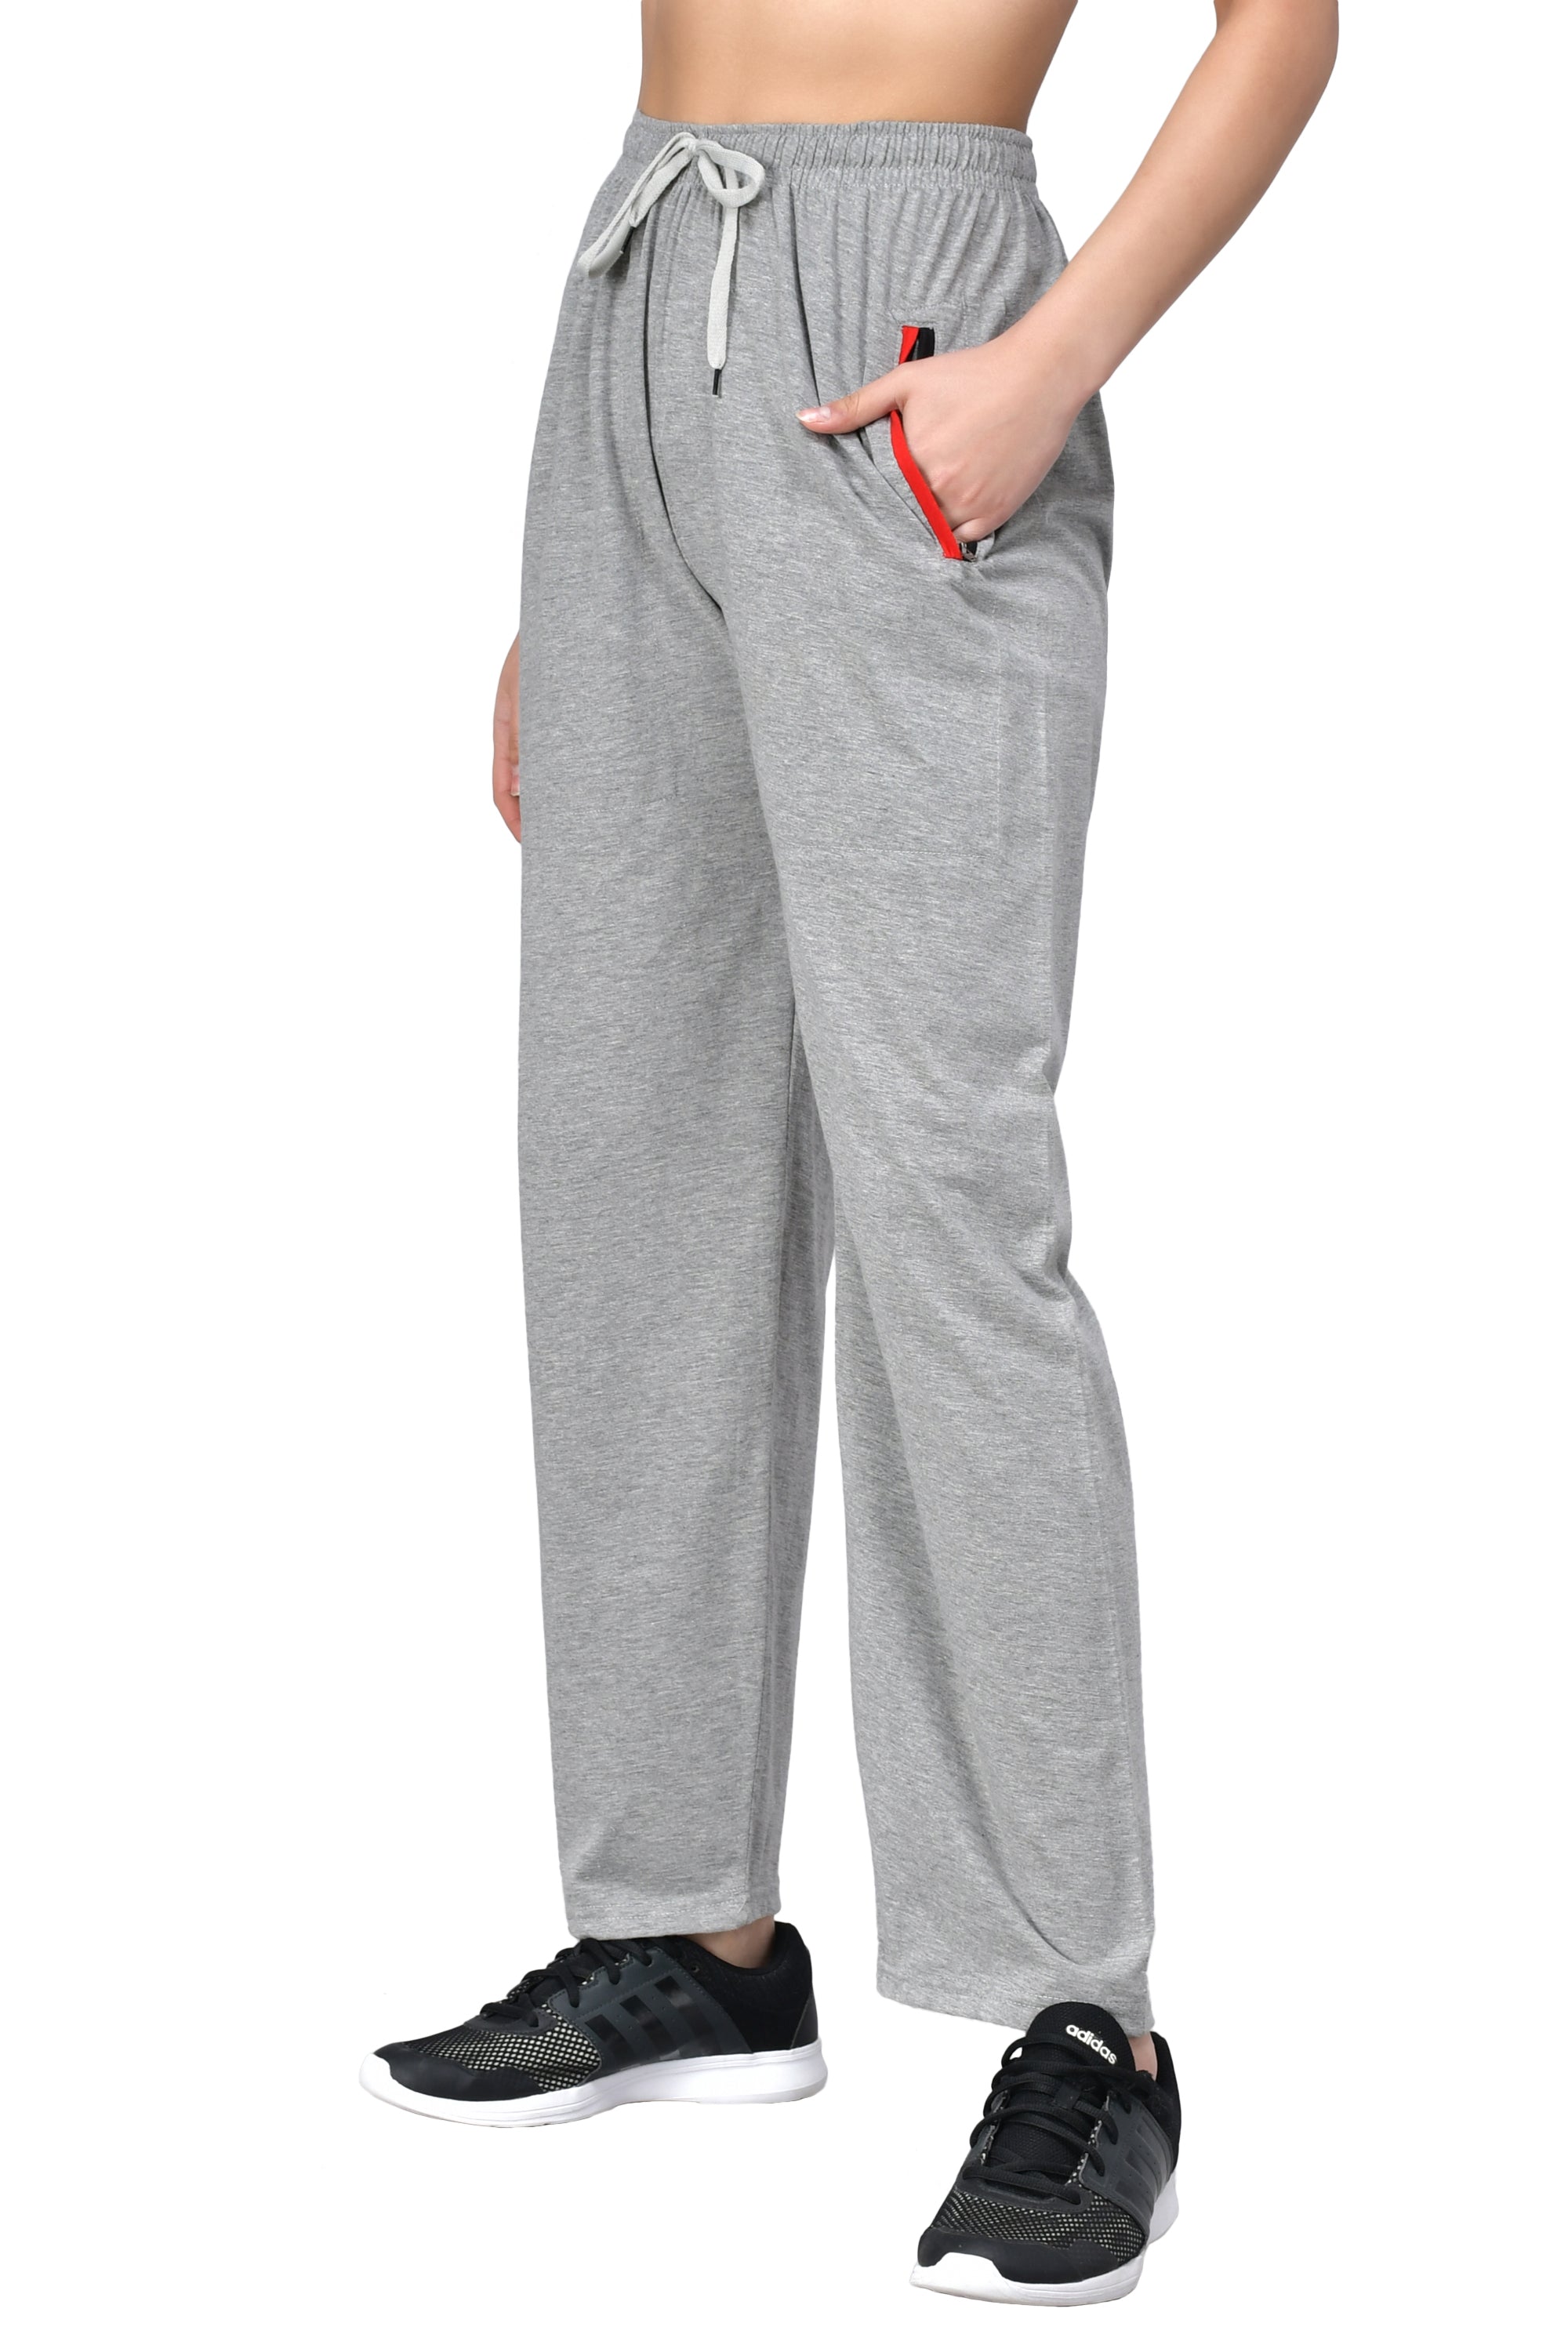 NI Men's Super Track Pant/ Lower With Zipper Pocket (1 Piece)